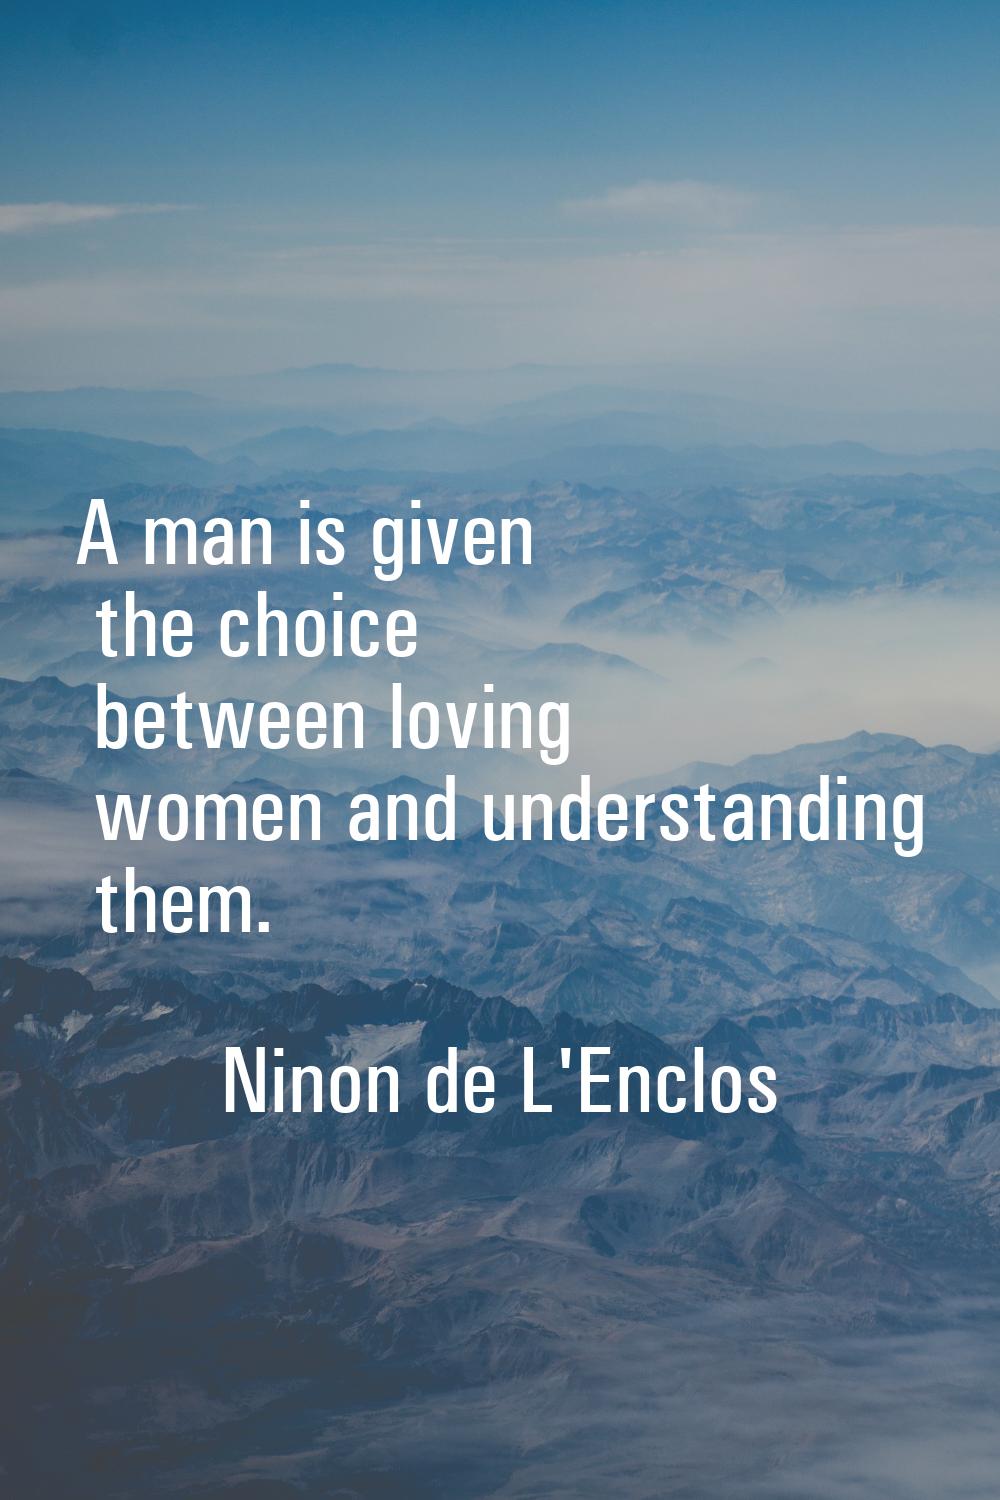 A man is given the choice between loving women and understanding them.